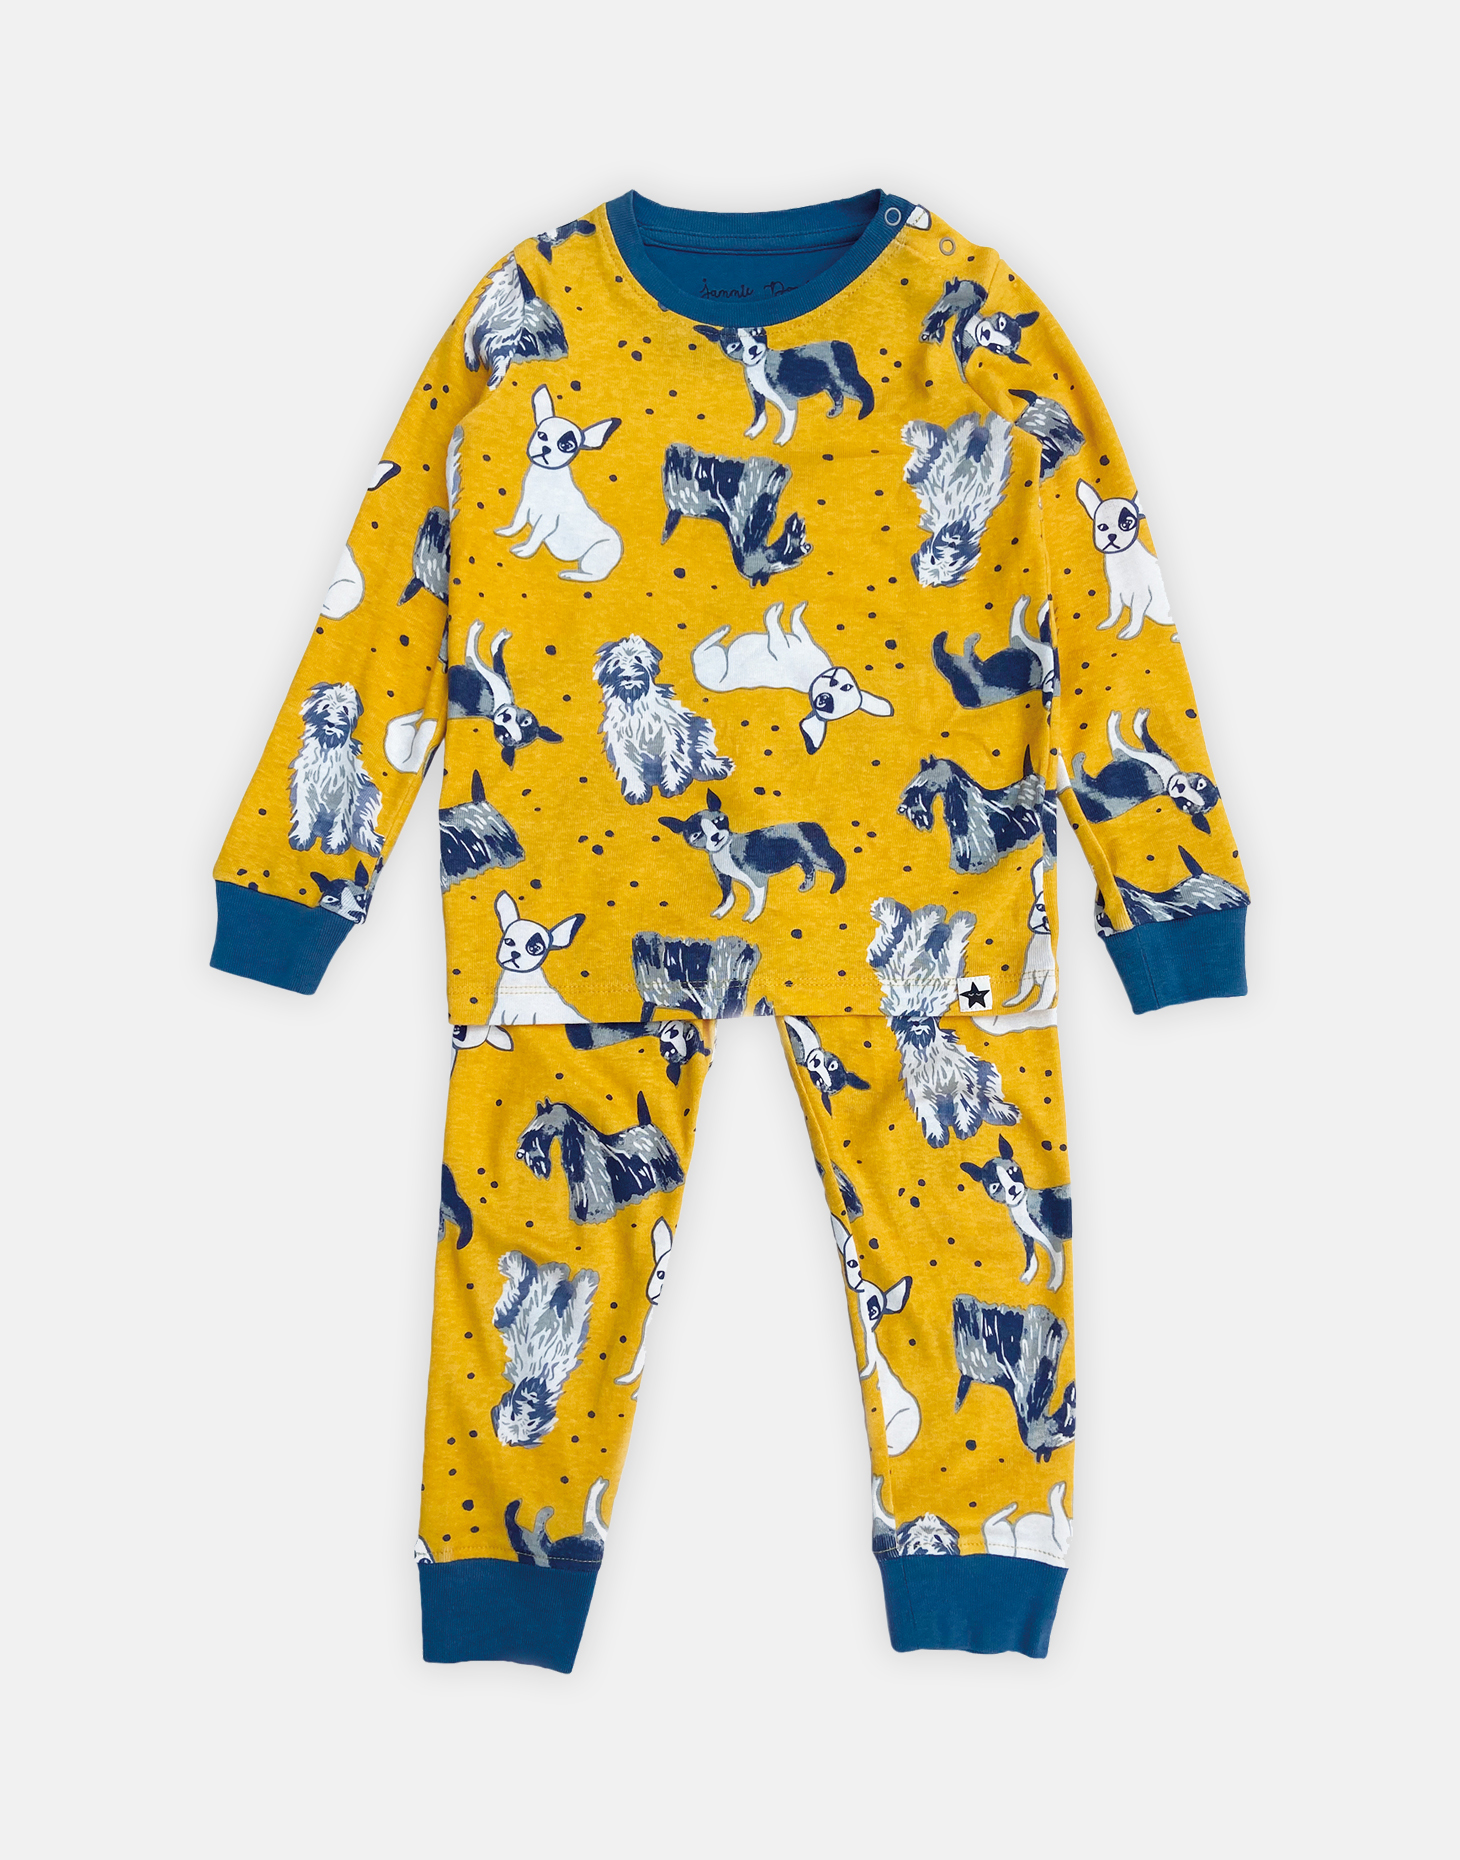 Jammie Doodles Yellow dog PJs in size 6-12 months